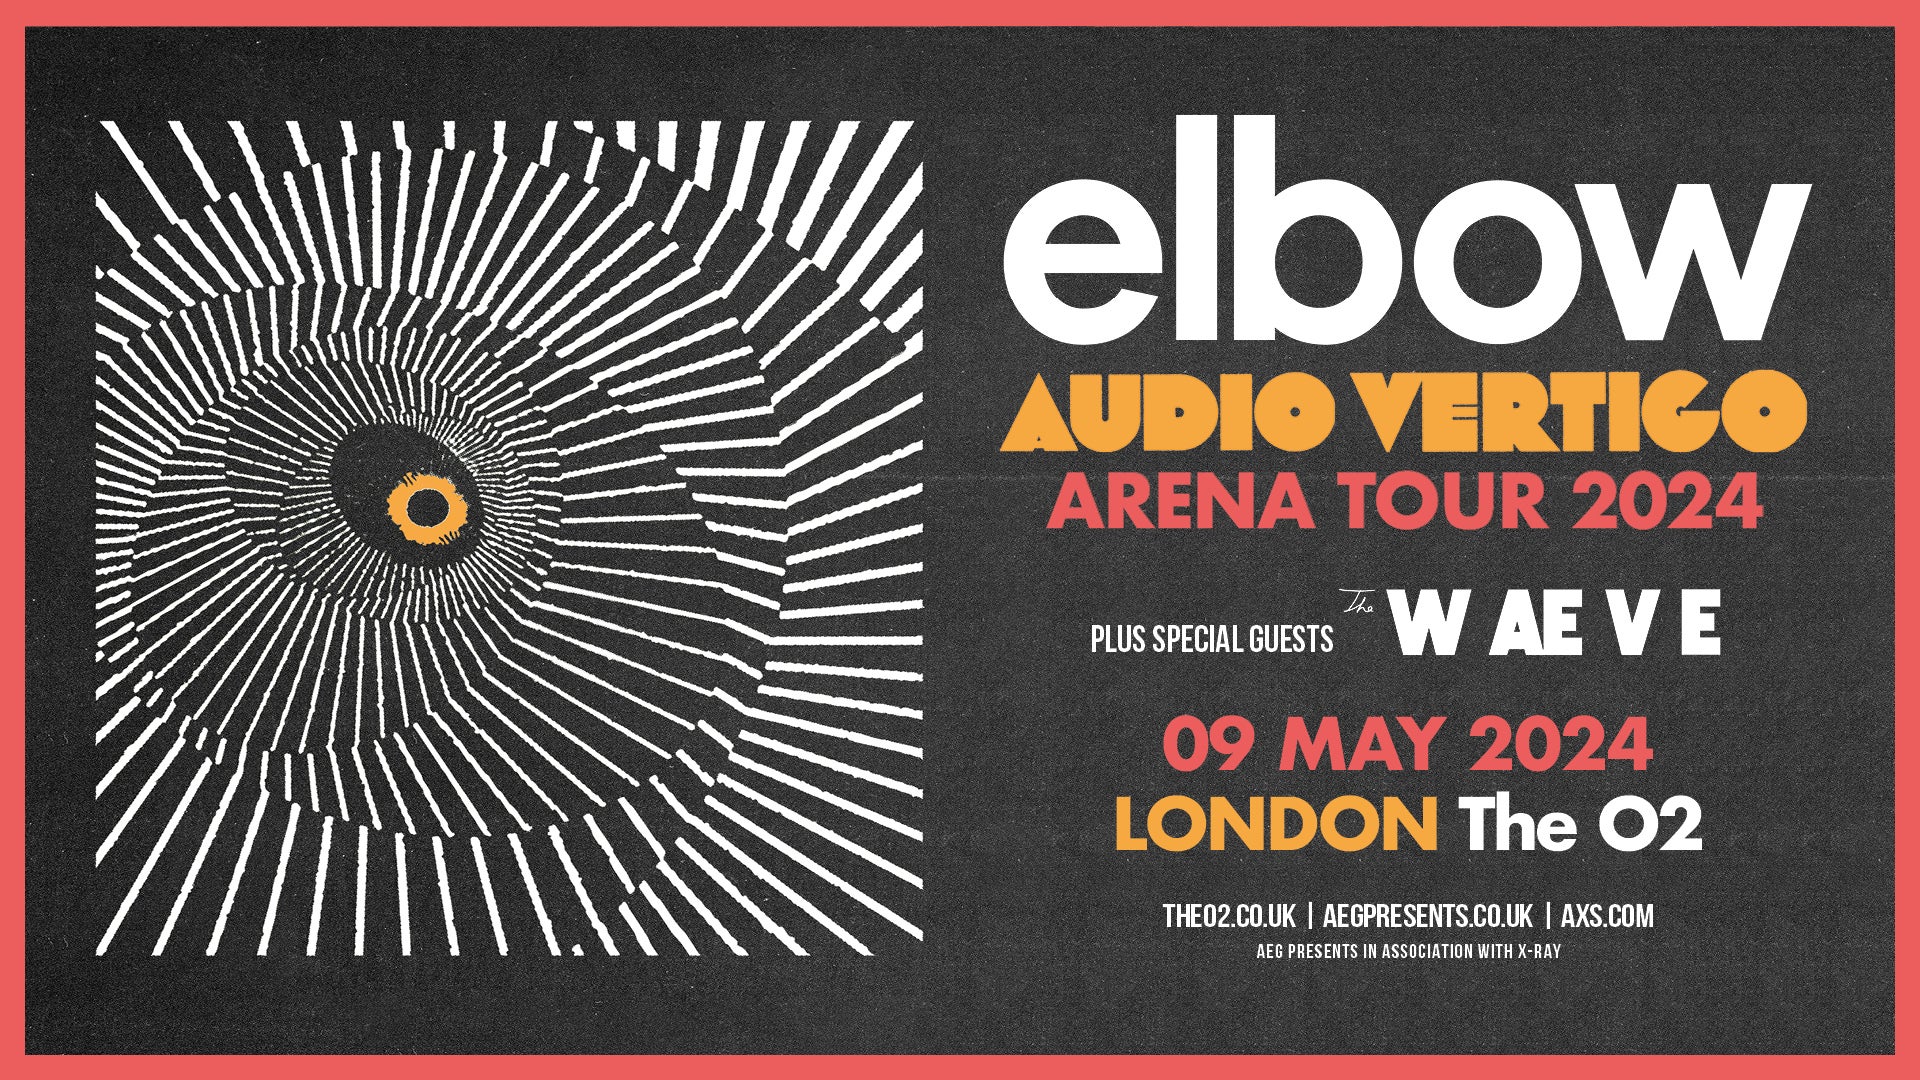 Event artwork for Elbow's 